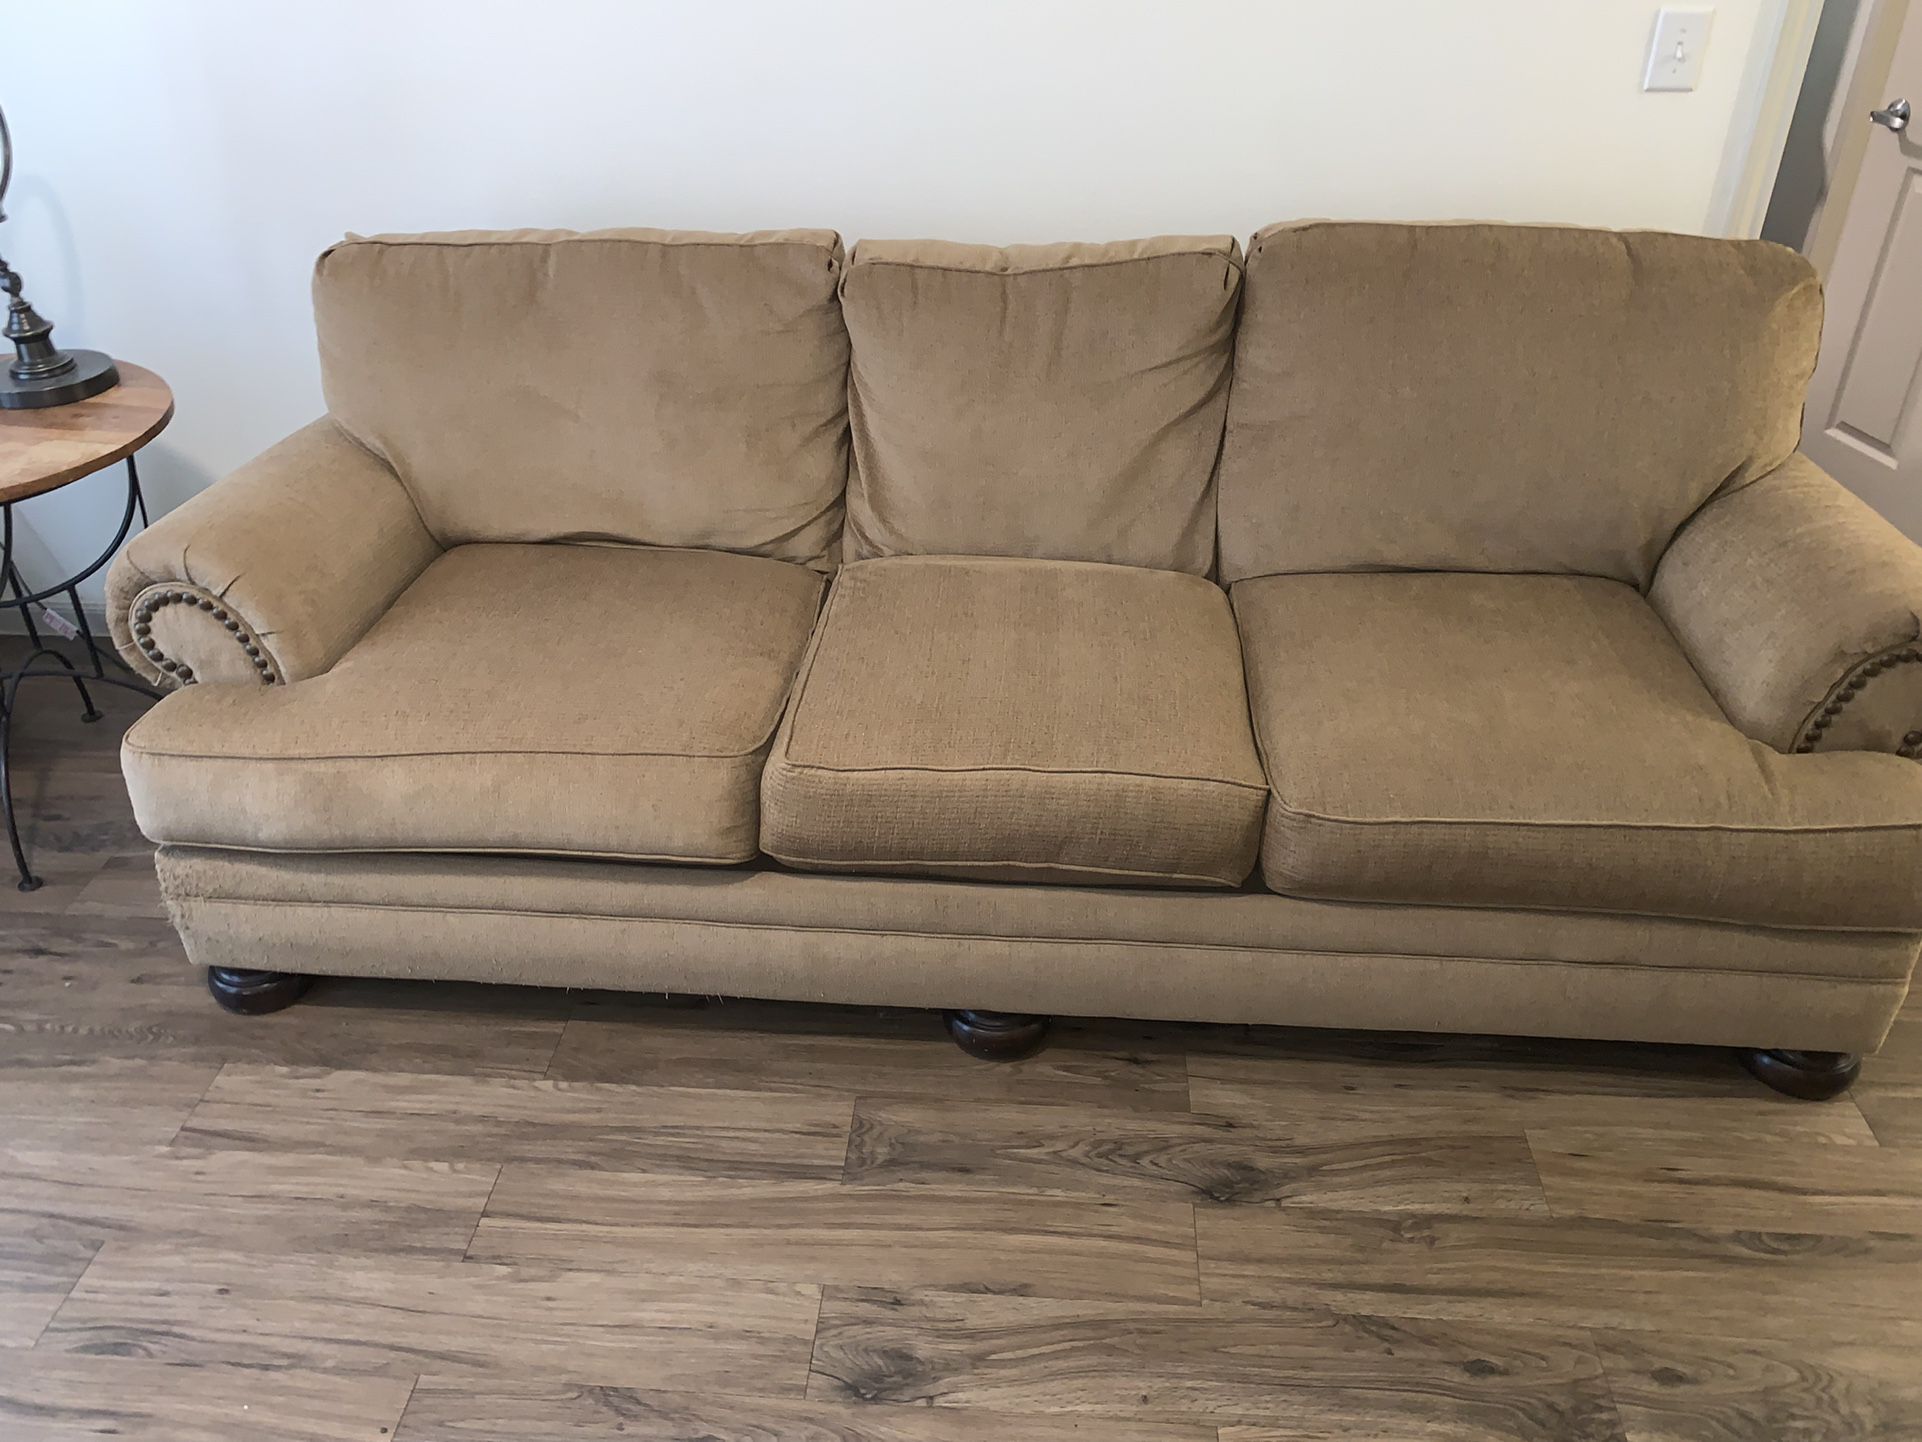 Living Room Couch - BEST OFFER 